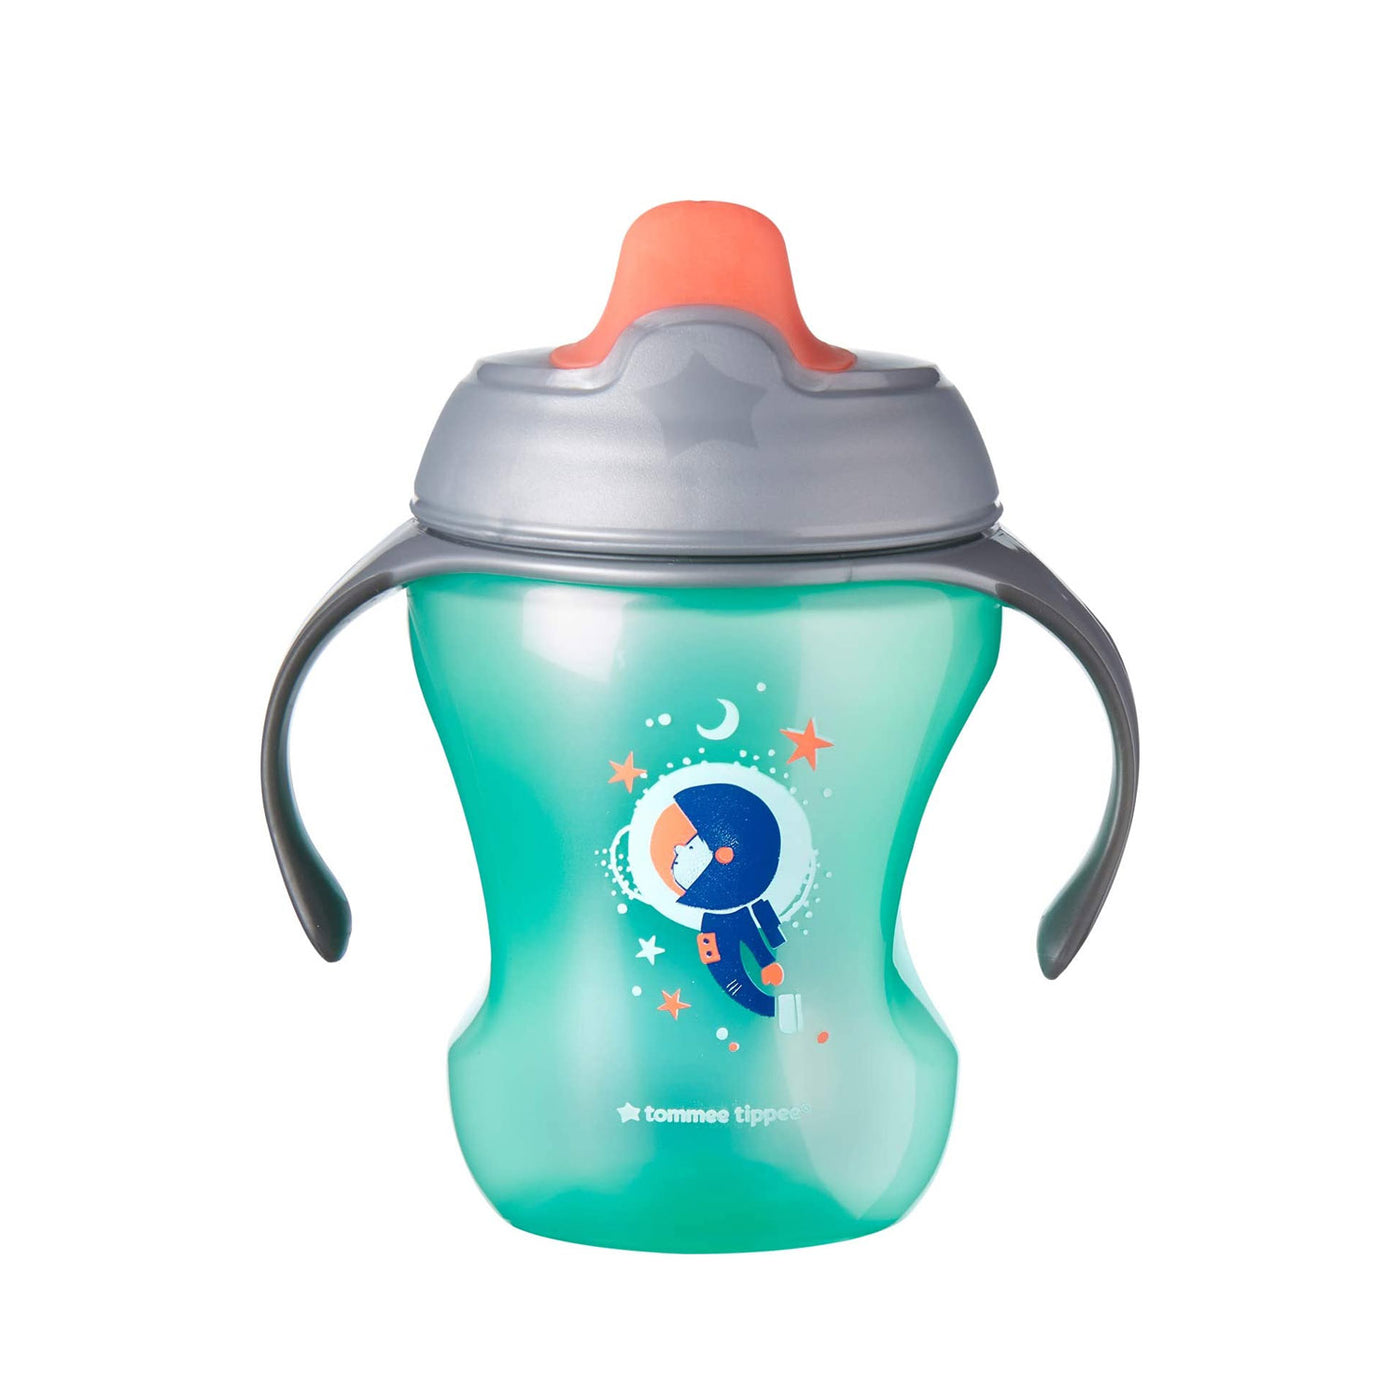 Tommee Tippee Infant Trainer Sippee Cup with Removable Handles Cup 8oz 549229